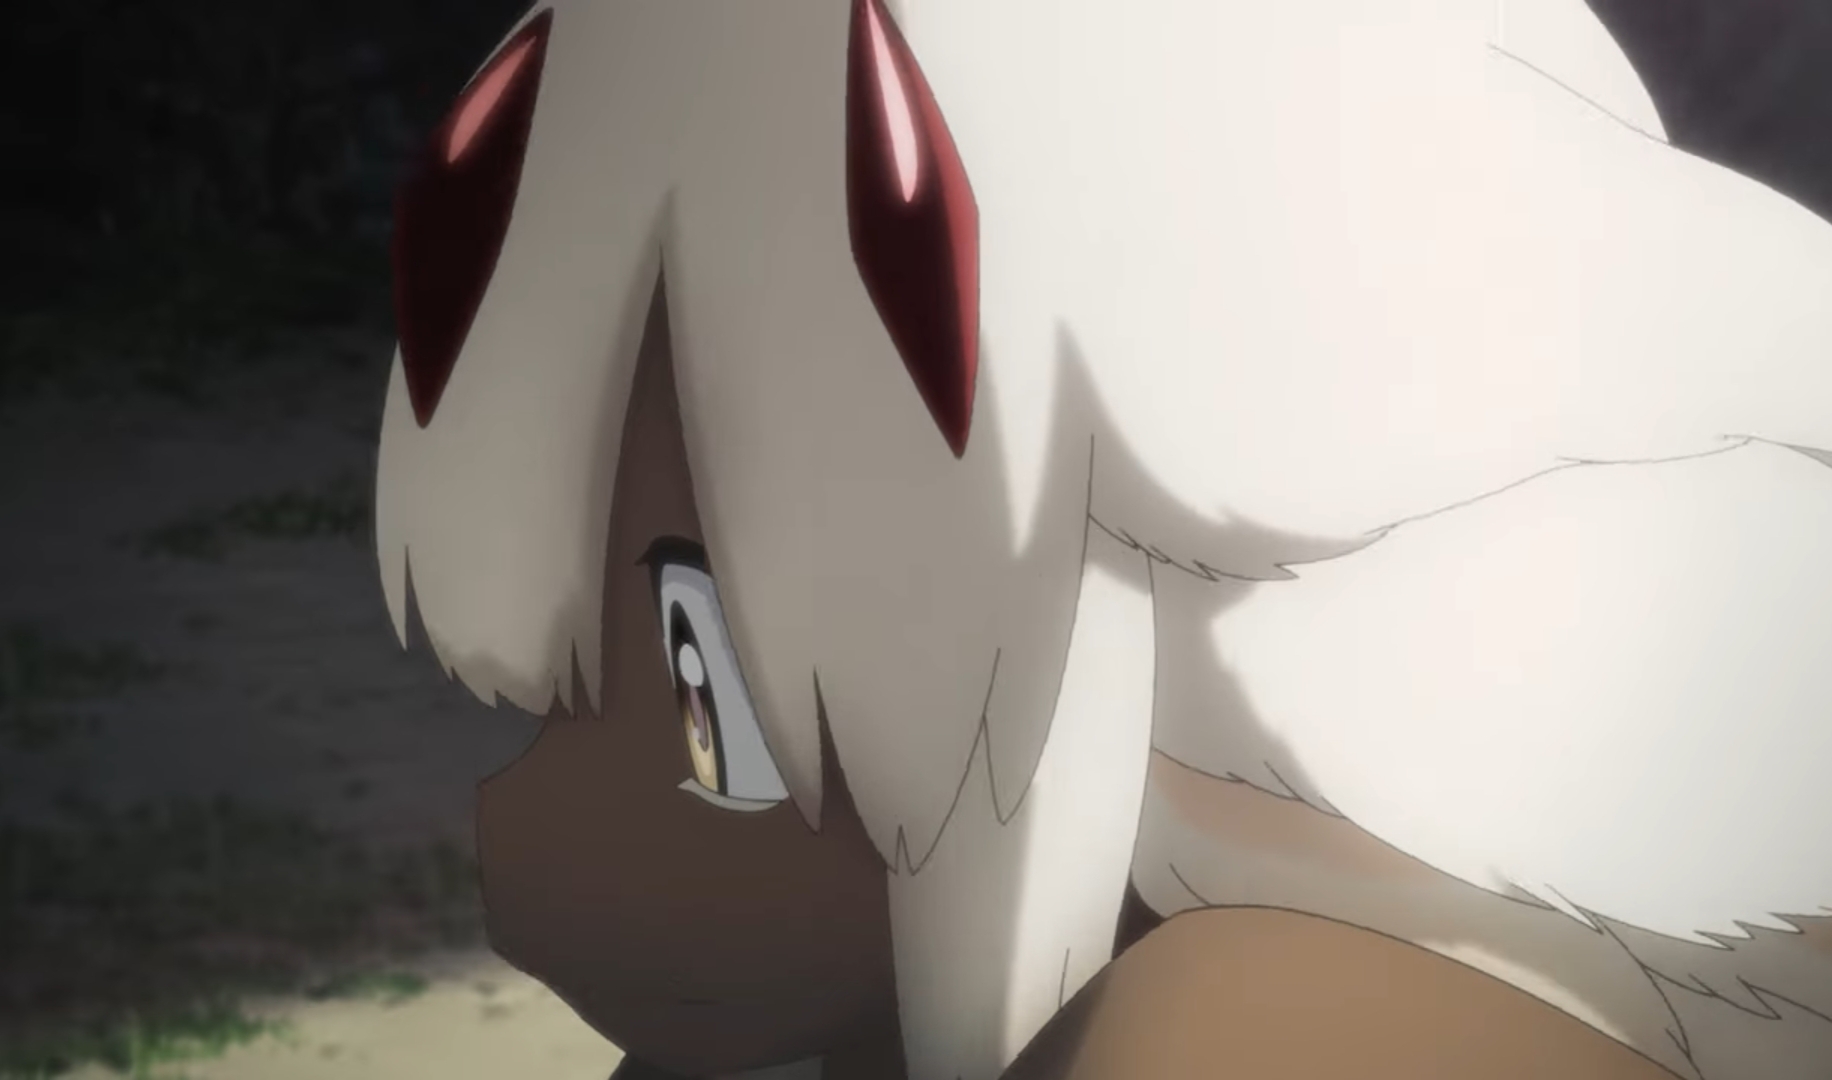 Made in Abyss Season 2 Episode 9 Recap and Ending, Explained